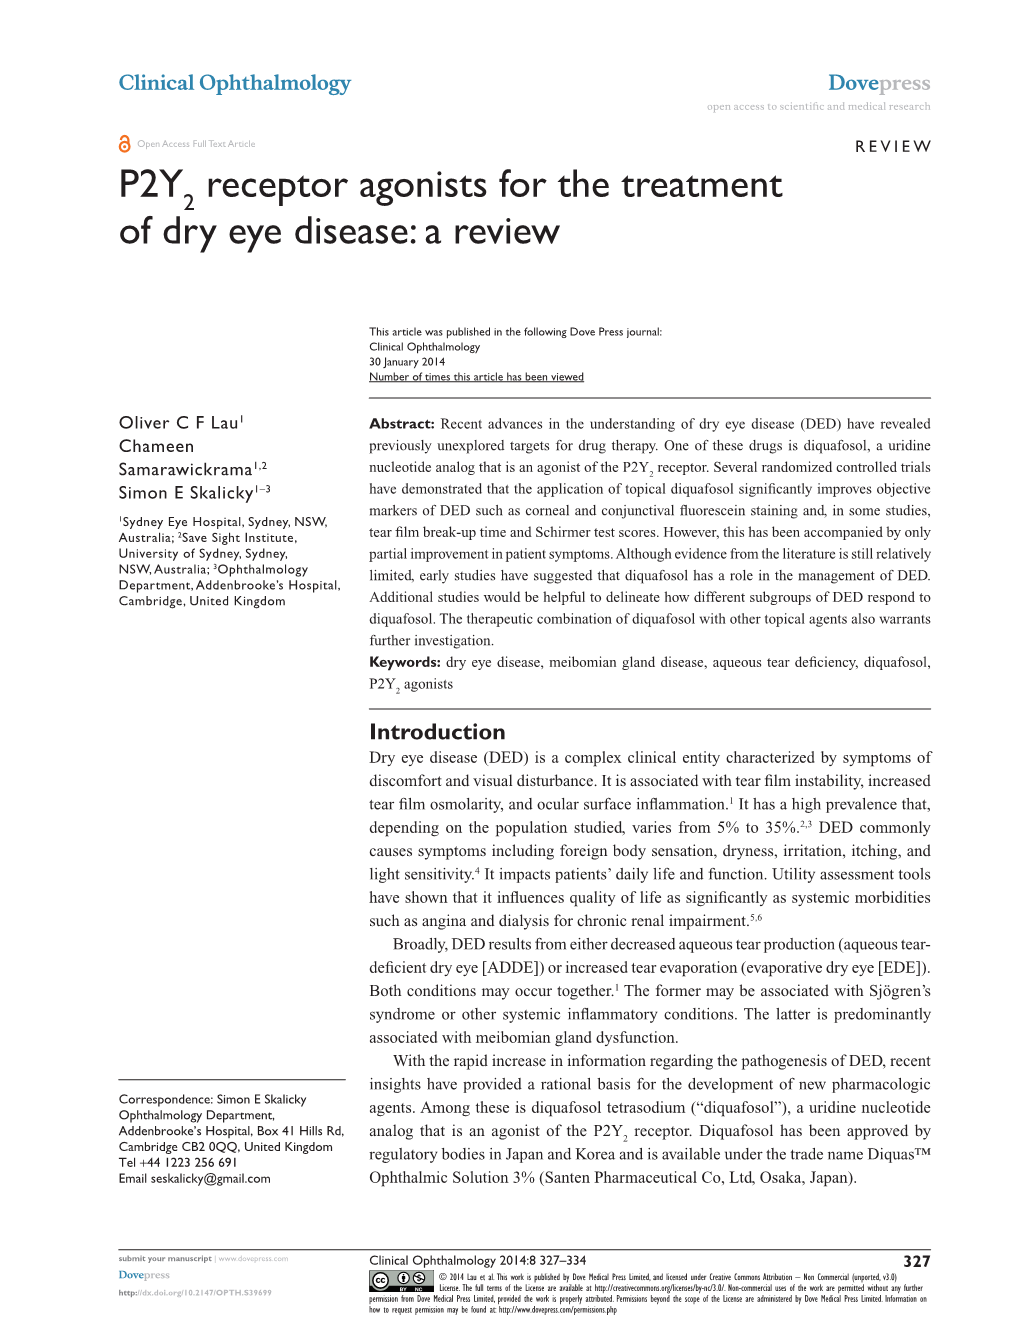 P2Y Receptor Agonists for the Treatment of Dry